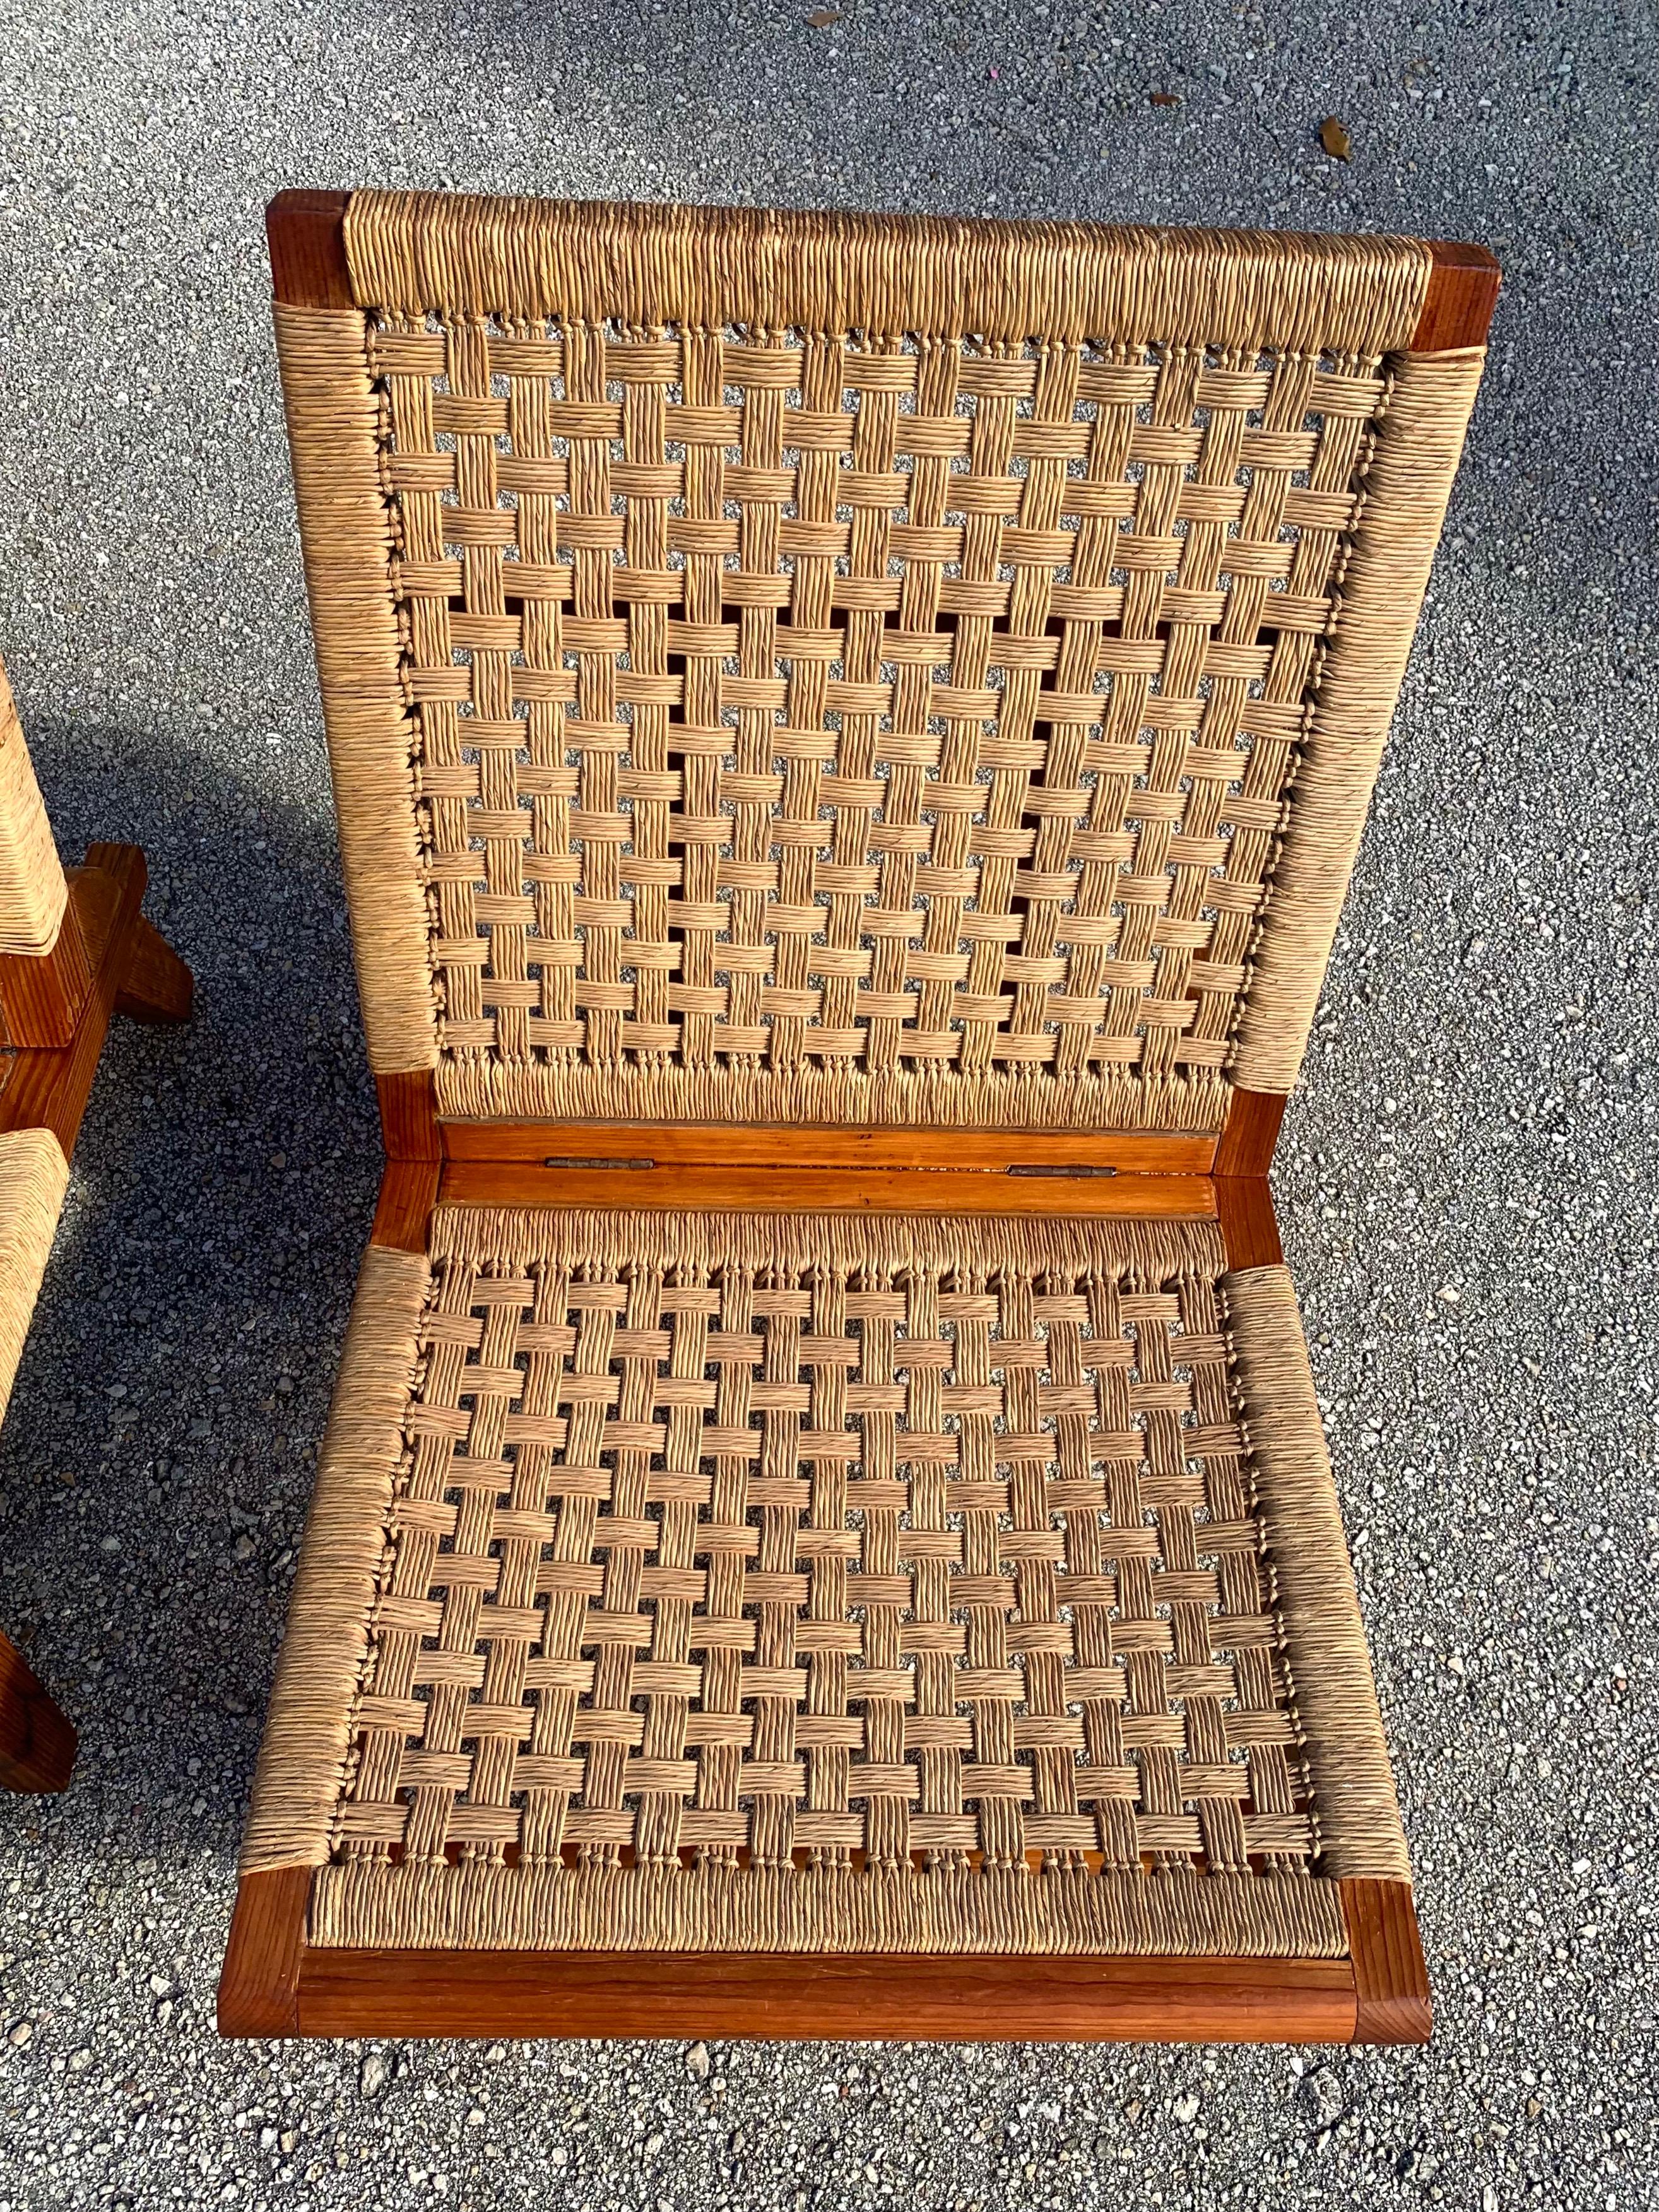 Pair of Mahogany Folding Chairs by Michael van Beuren for Domus of Mexico City In Good Condition In Boynton Beach, FL